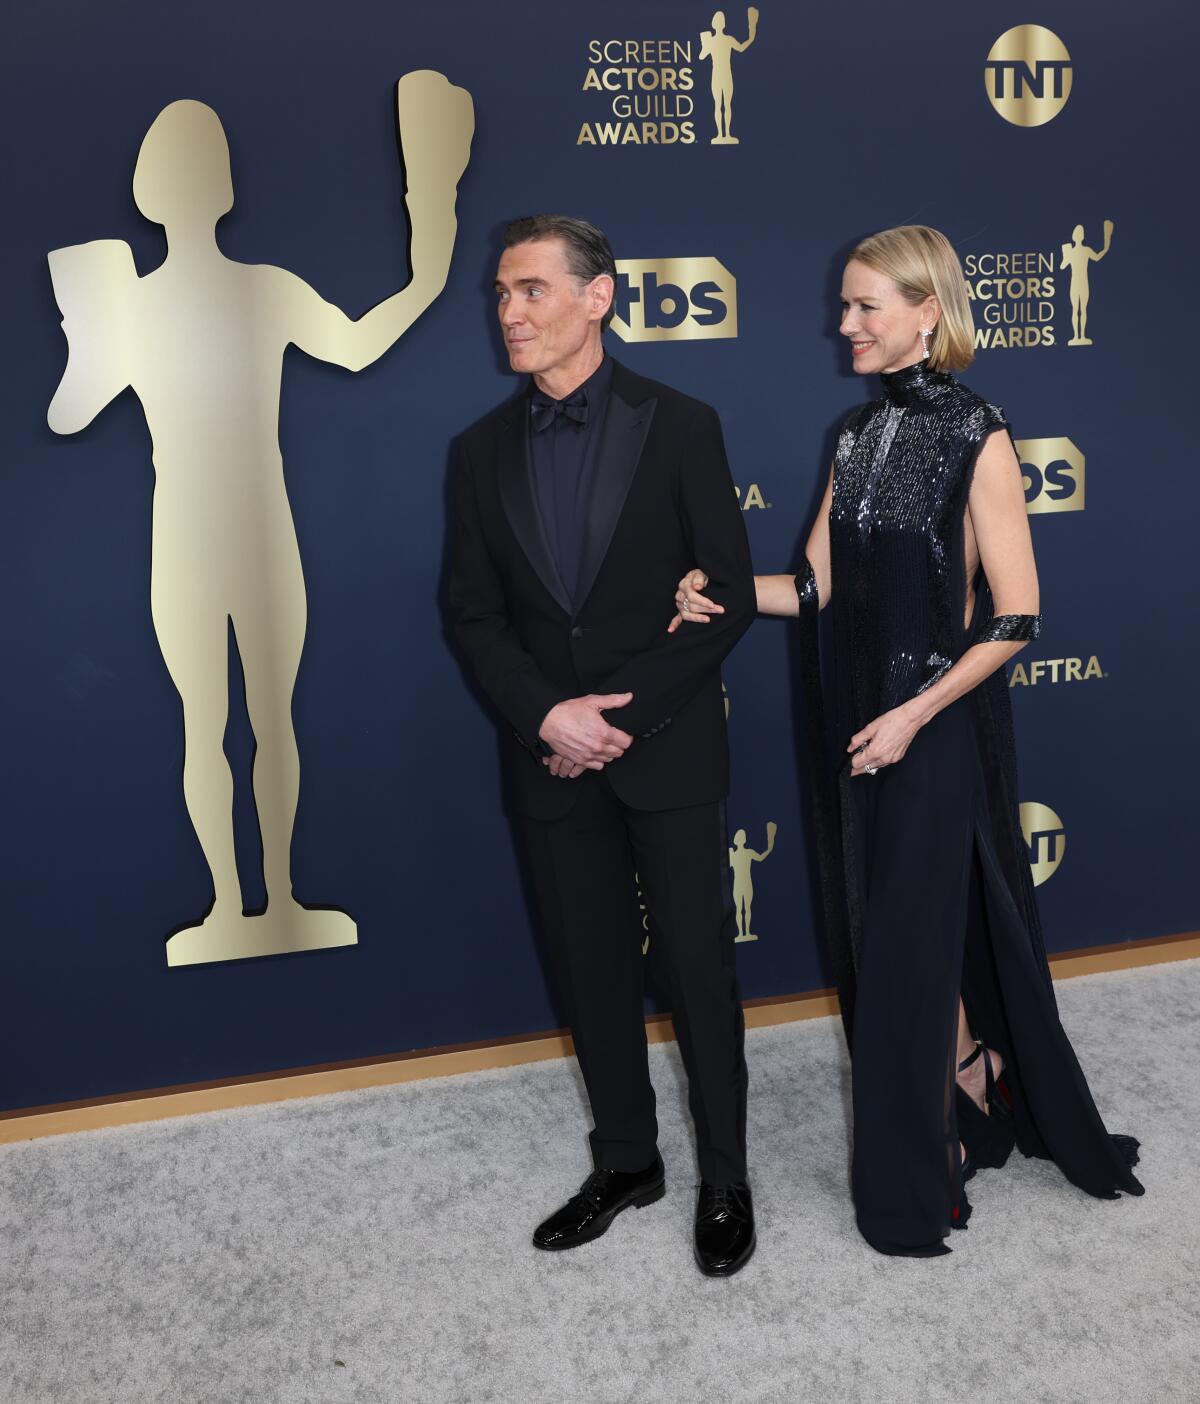 Billy Crudup and Naomi Watts arriving at the 28th Screen Actors Guild Awards  in 2022